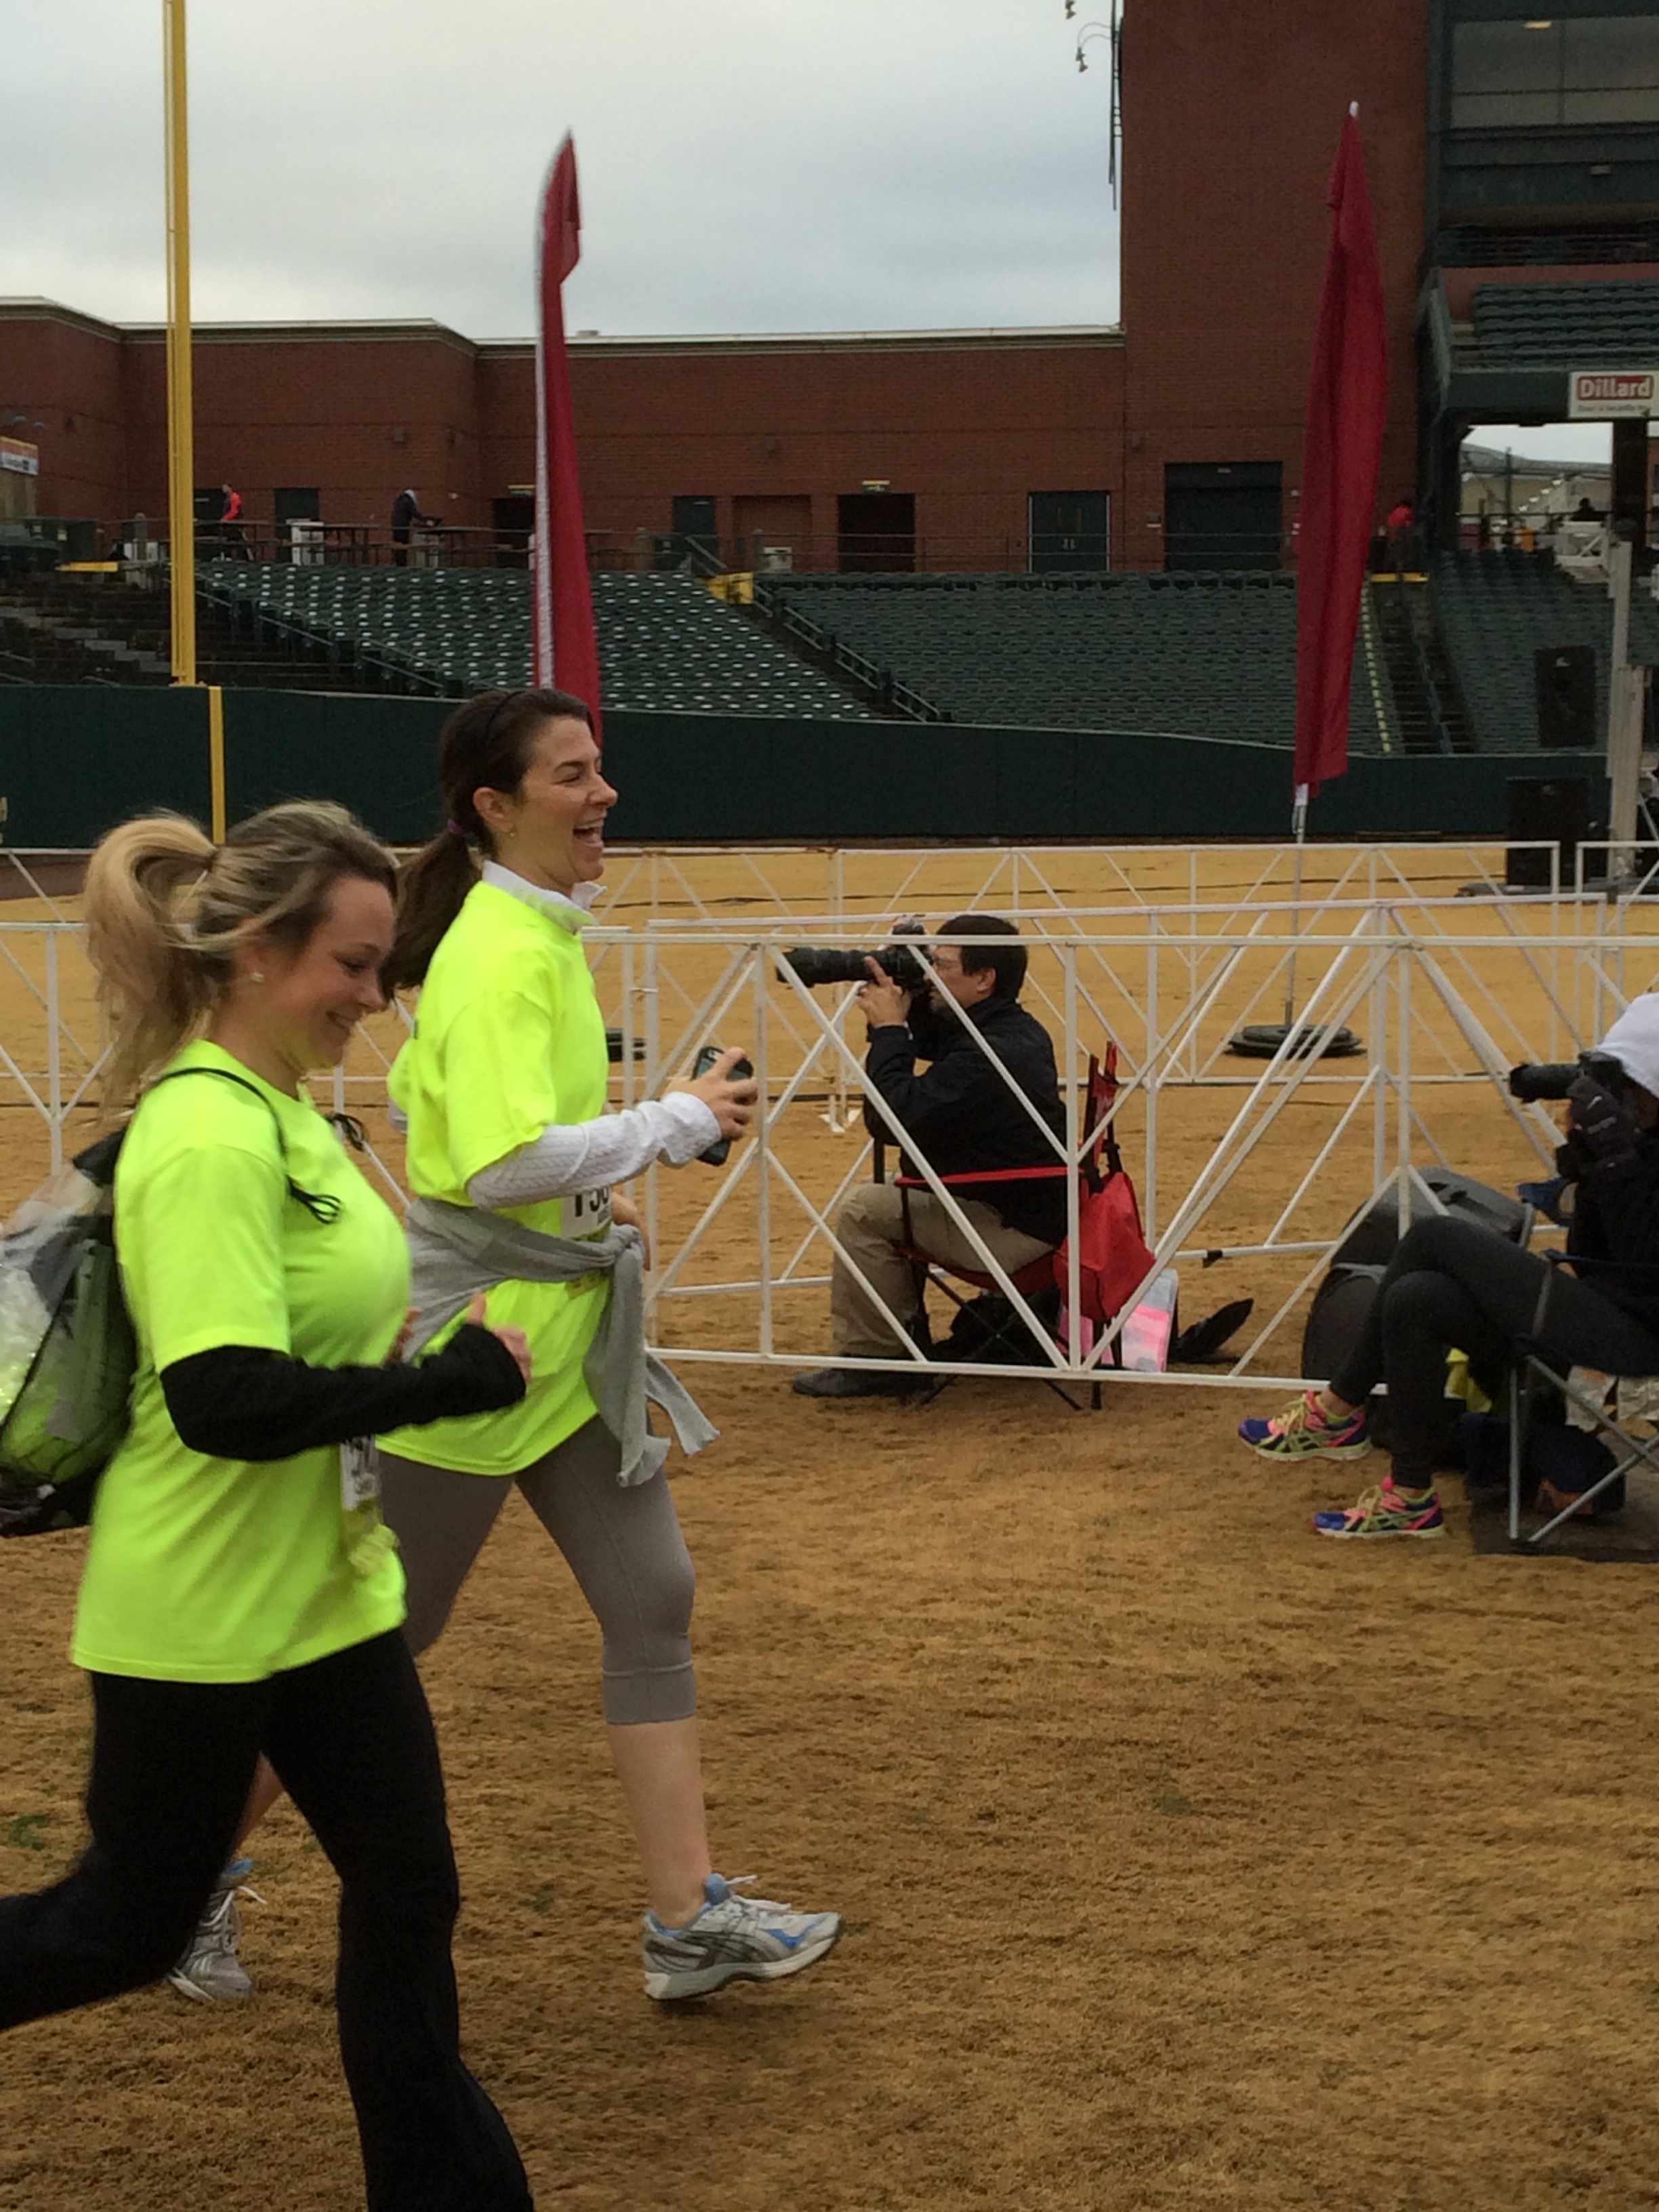 Dr. Bailey at the finish line